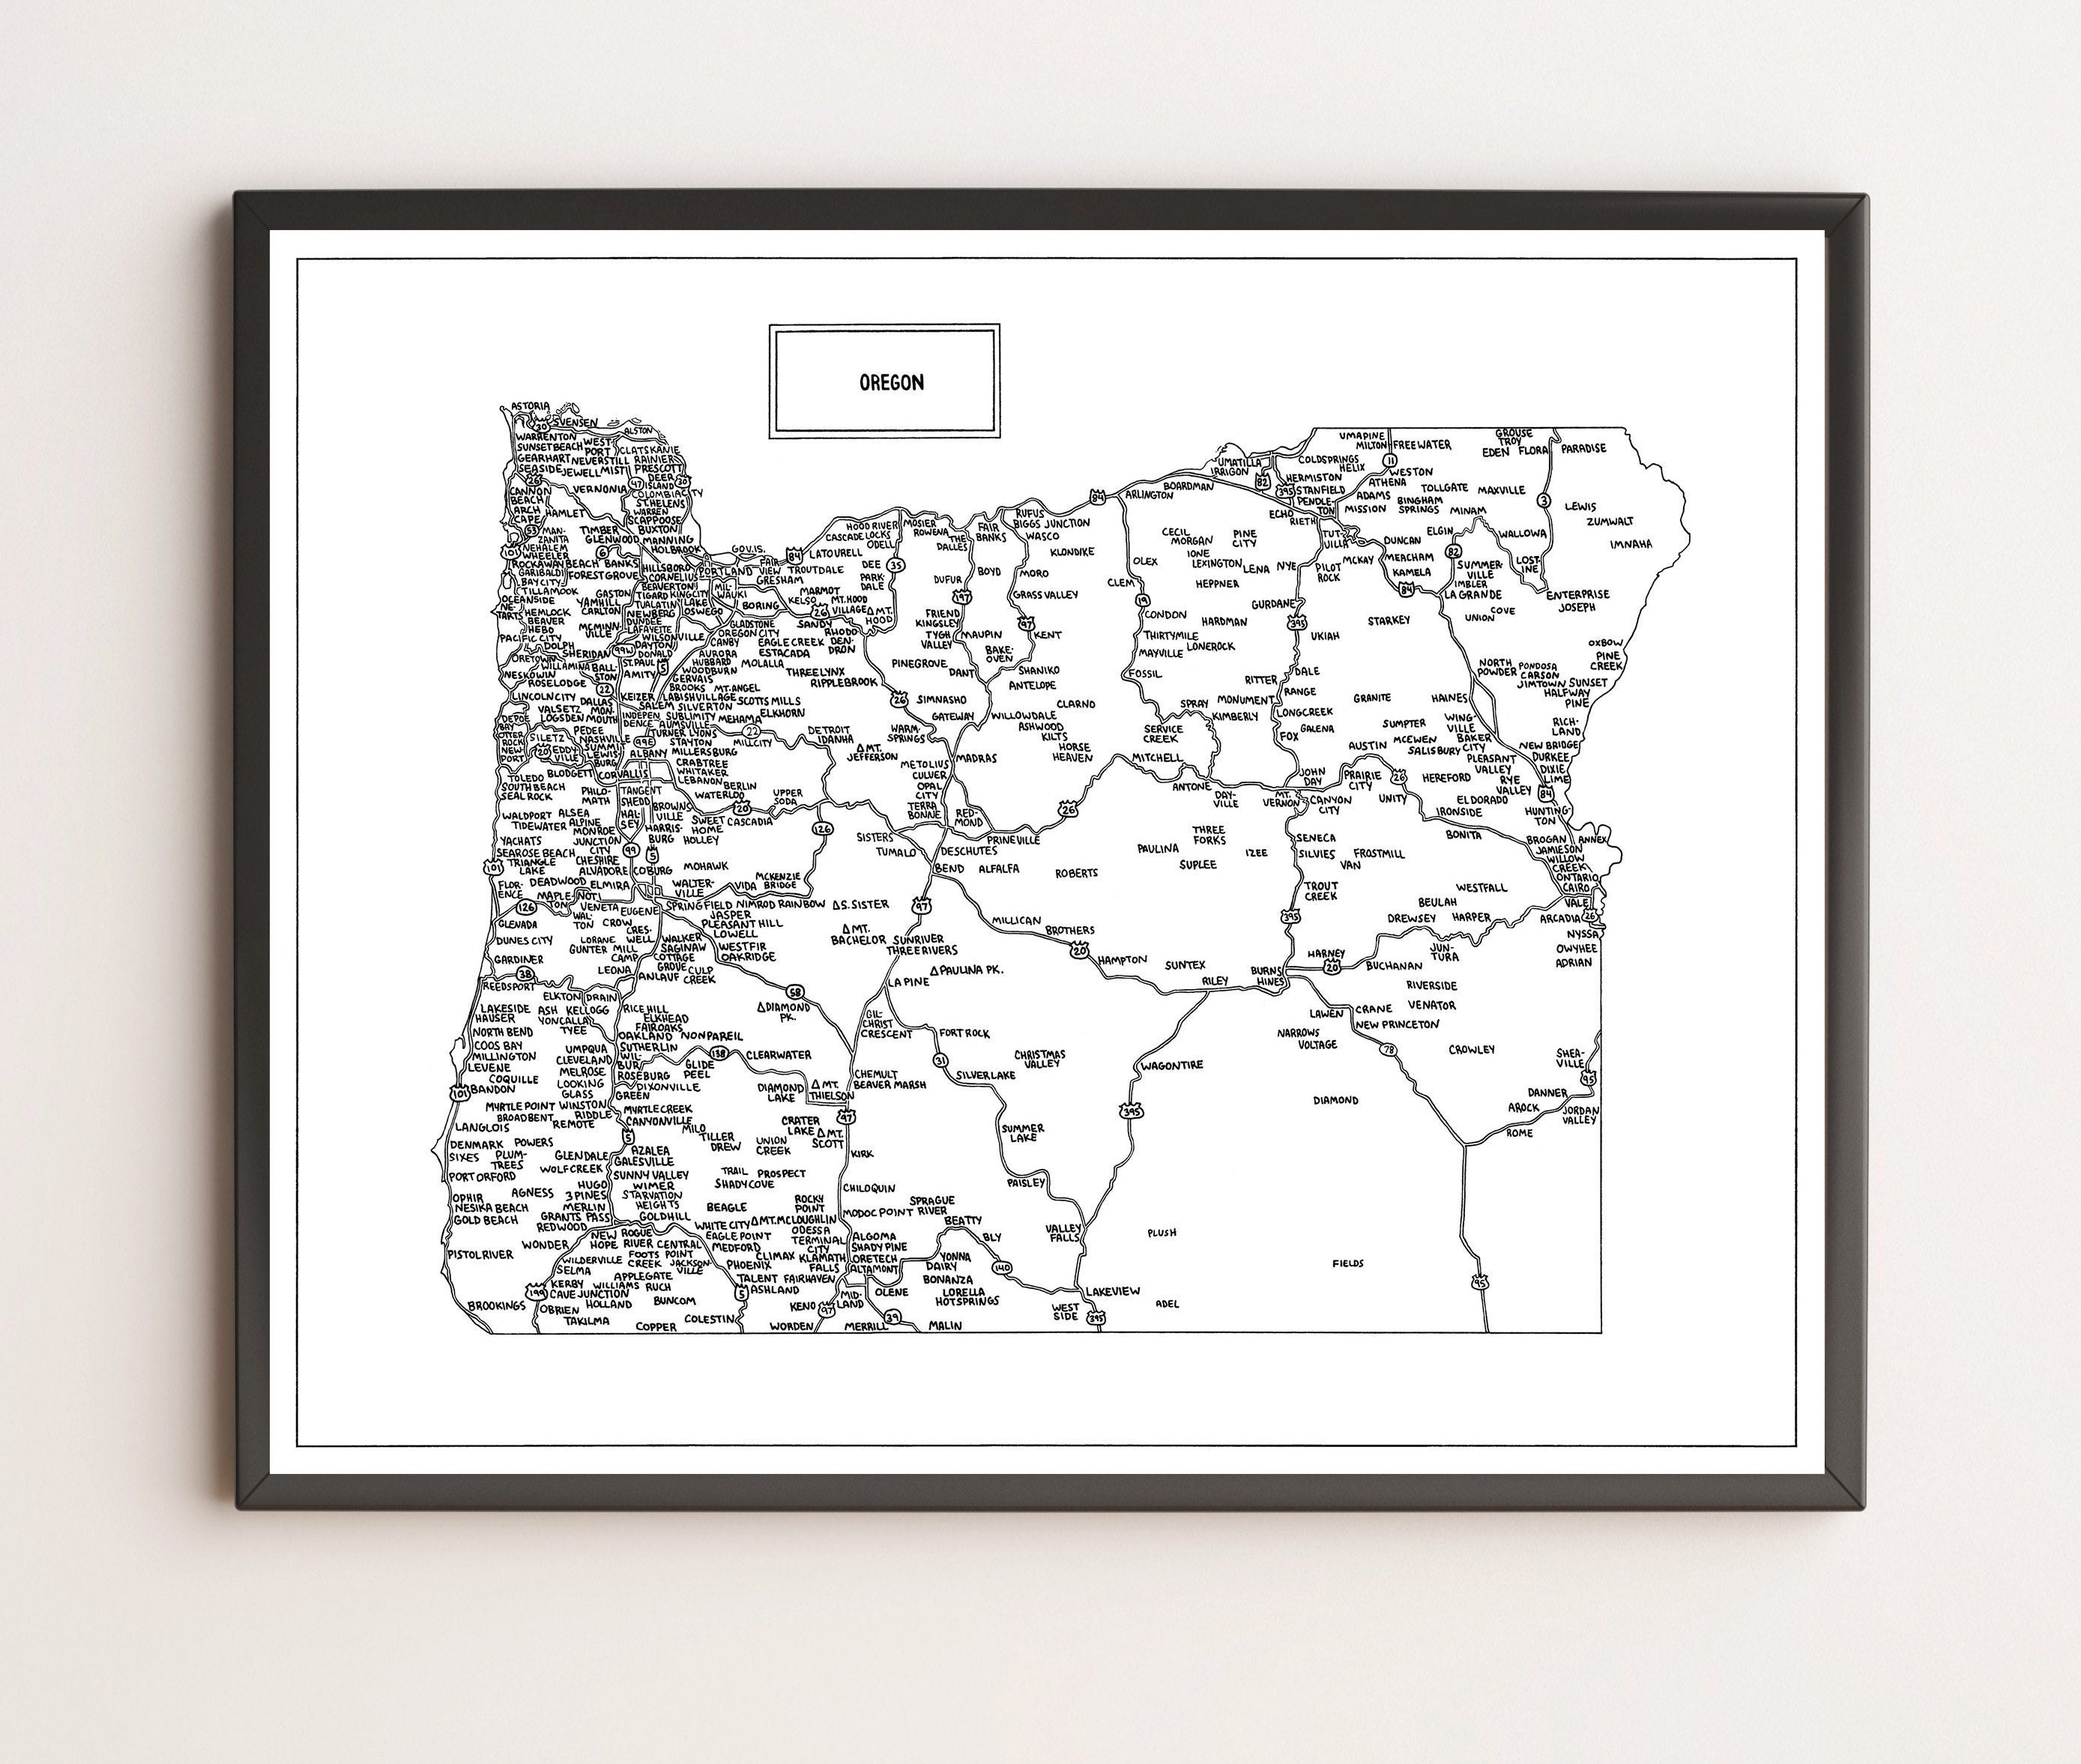 Road Map of Oregon Hand-drawn Black and White Digital pic